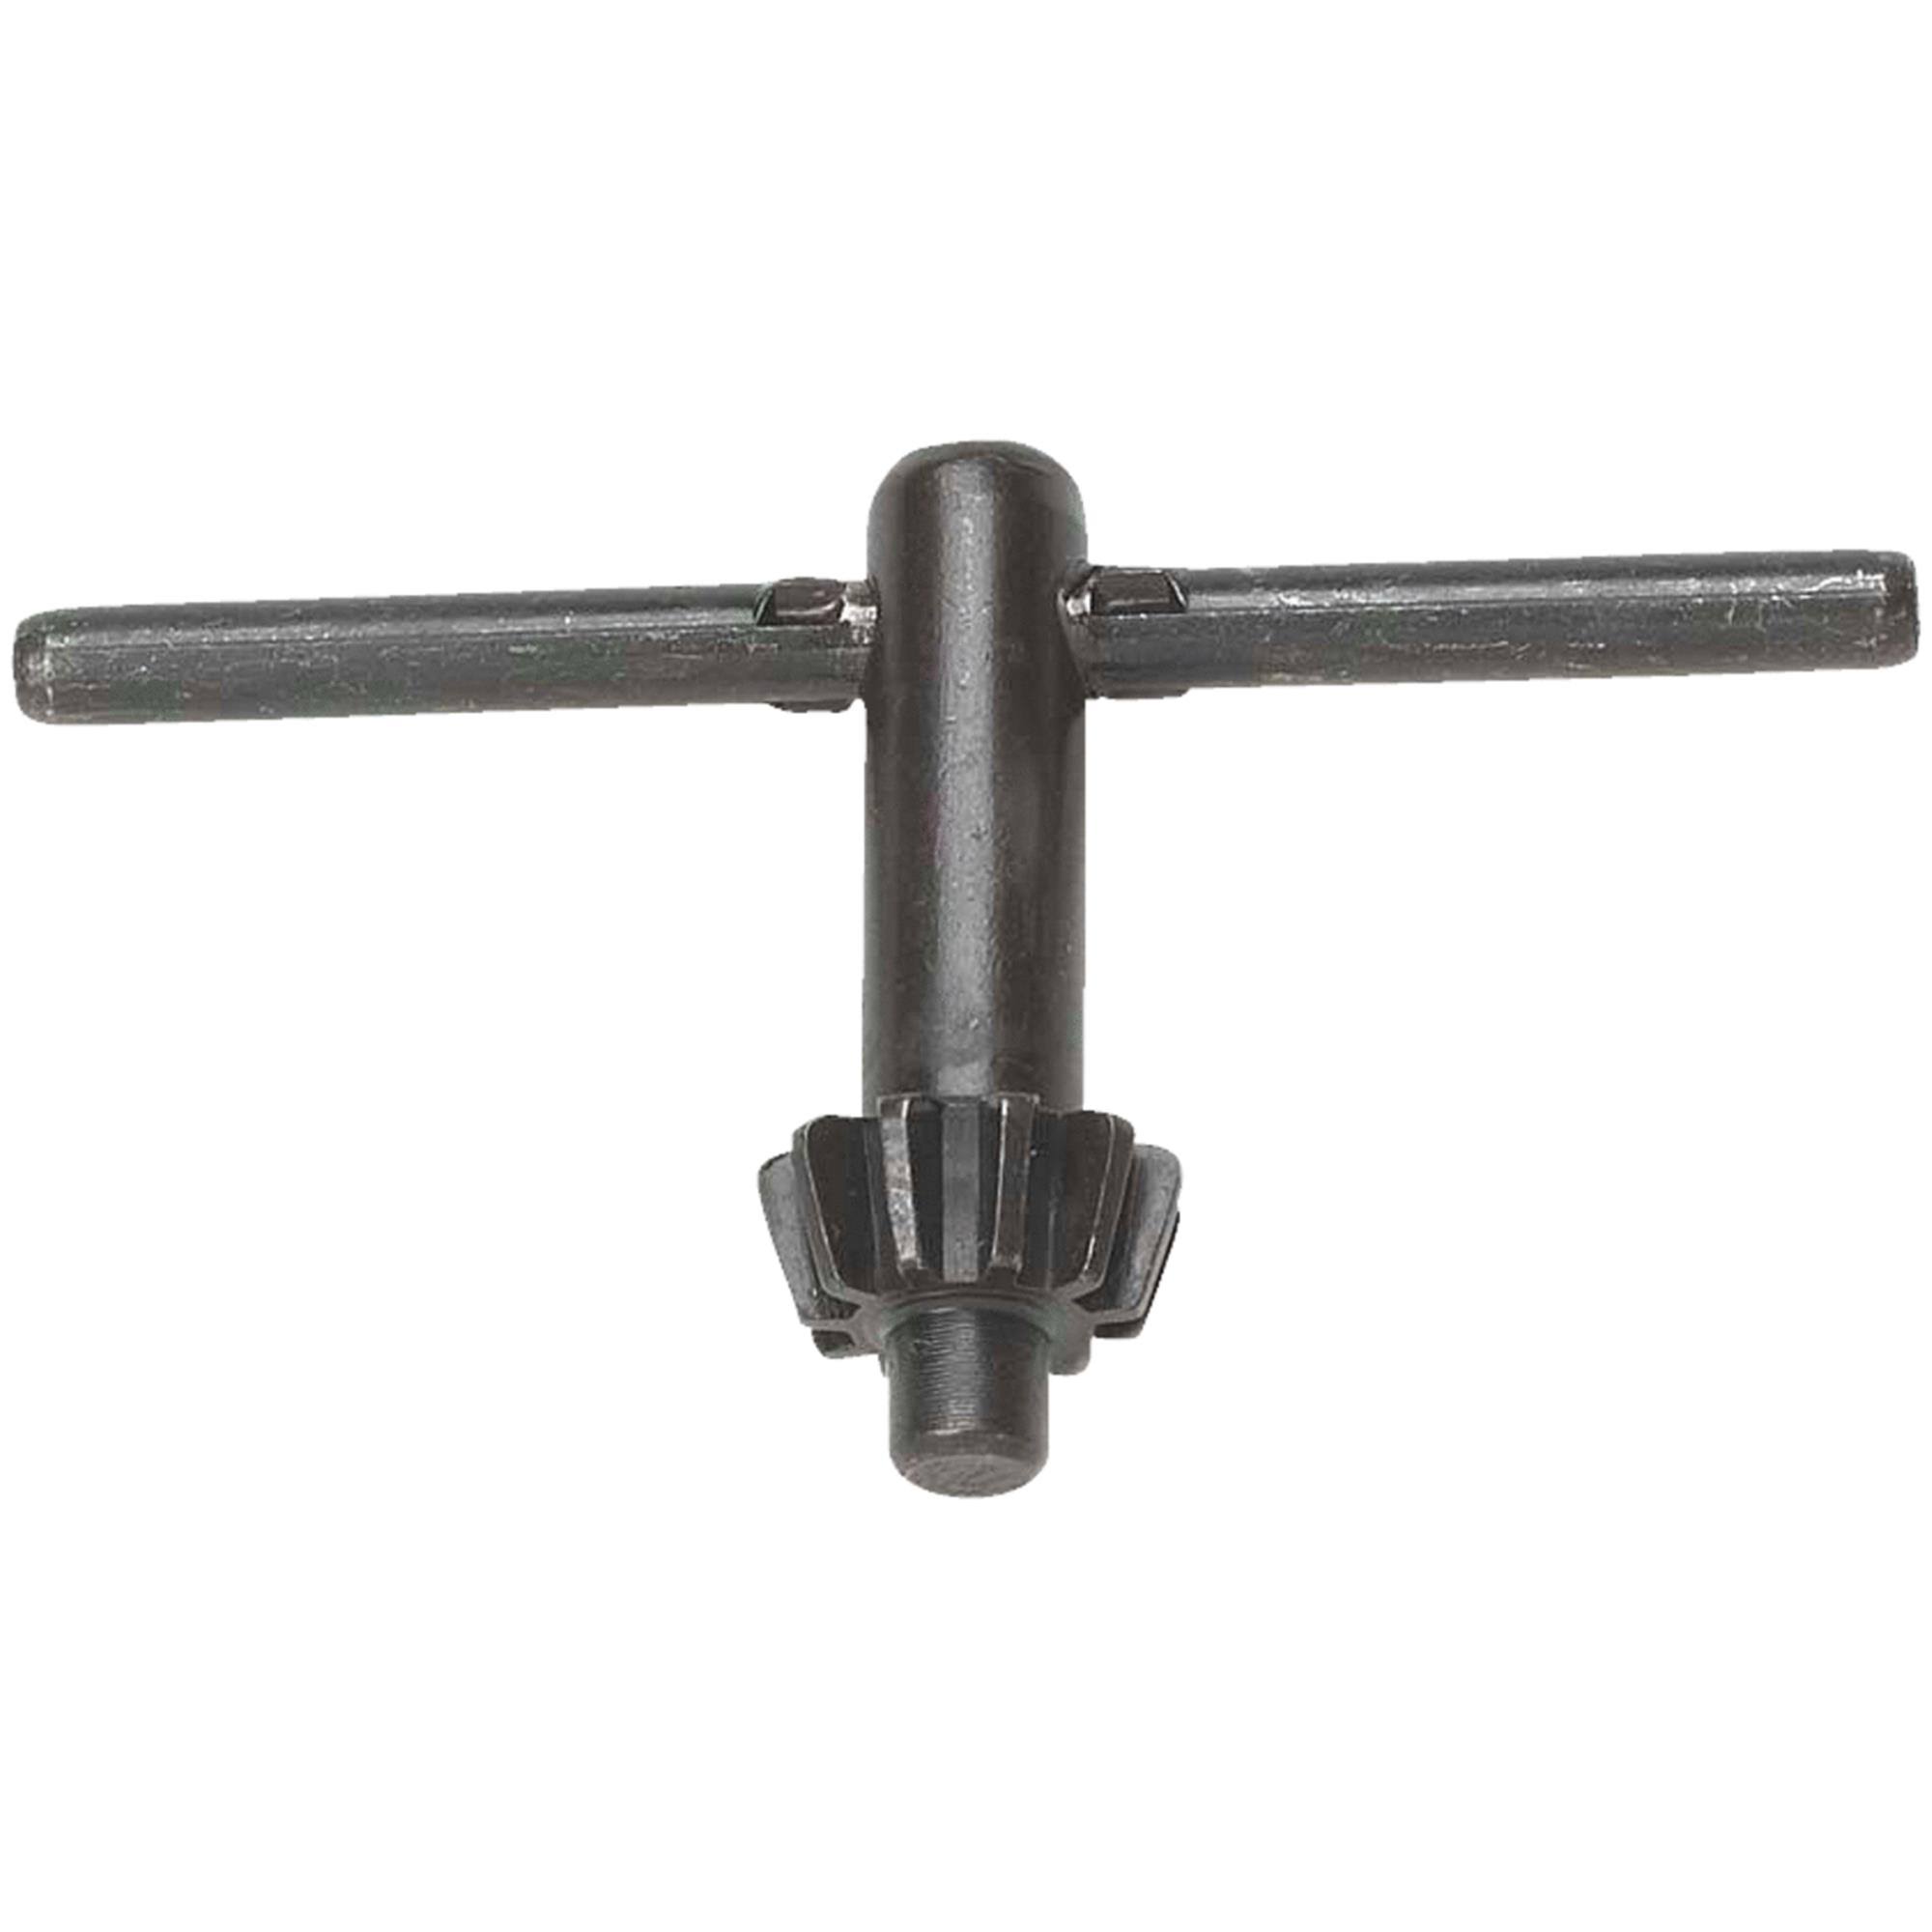 Jacobs 1/4 in. and 3/8 in. Chuck Key with 1/4 in. Pilot 30249